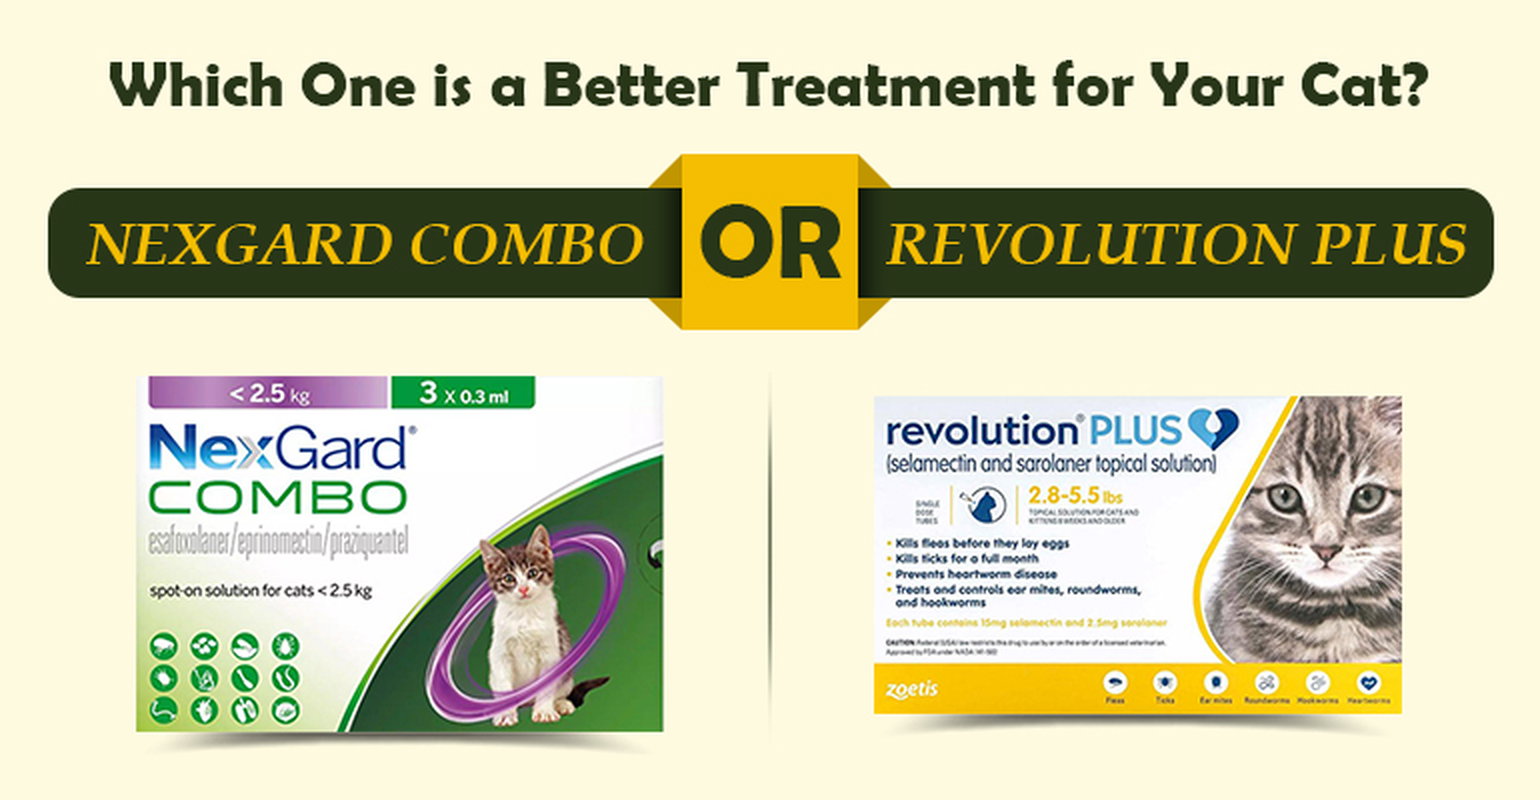 Which One is a Better Treatment for Your Cat, Nexgard Combo or Revolution Plus?